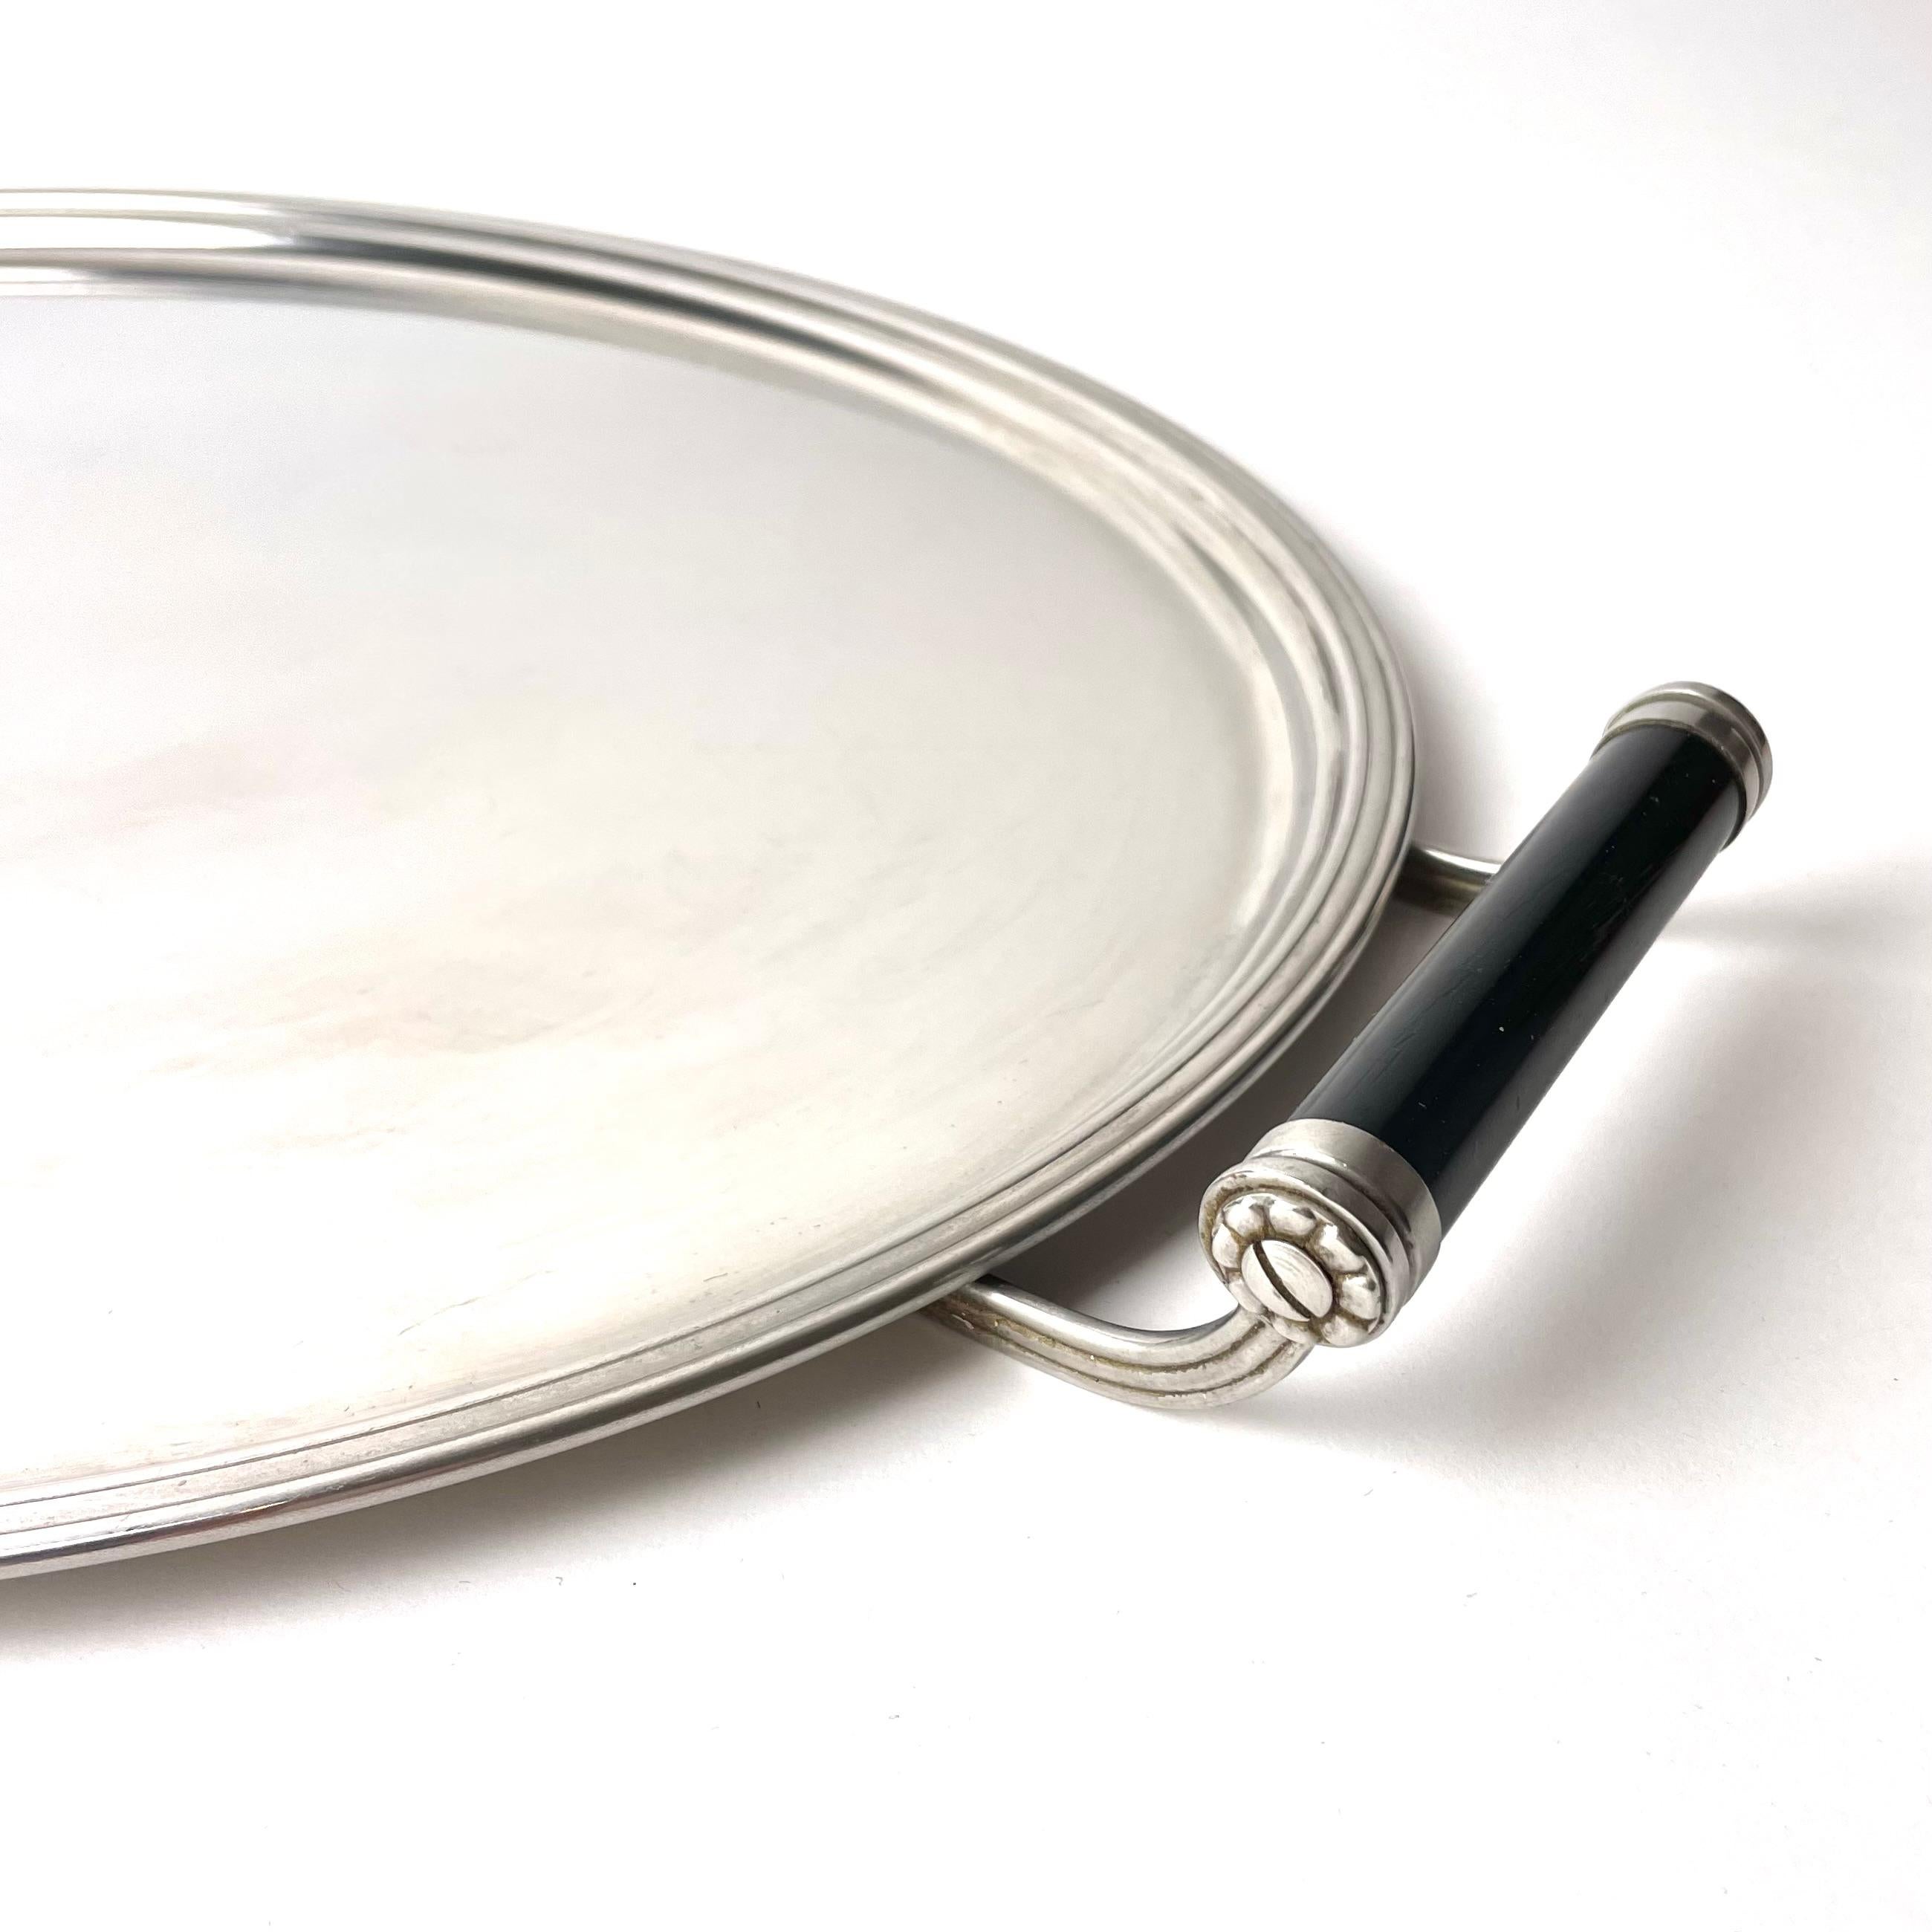 Art Deco Refined Swedish Grace Tray, Stainless Steel and Bakelite, Gense 1930s Sweden For Sale